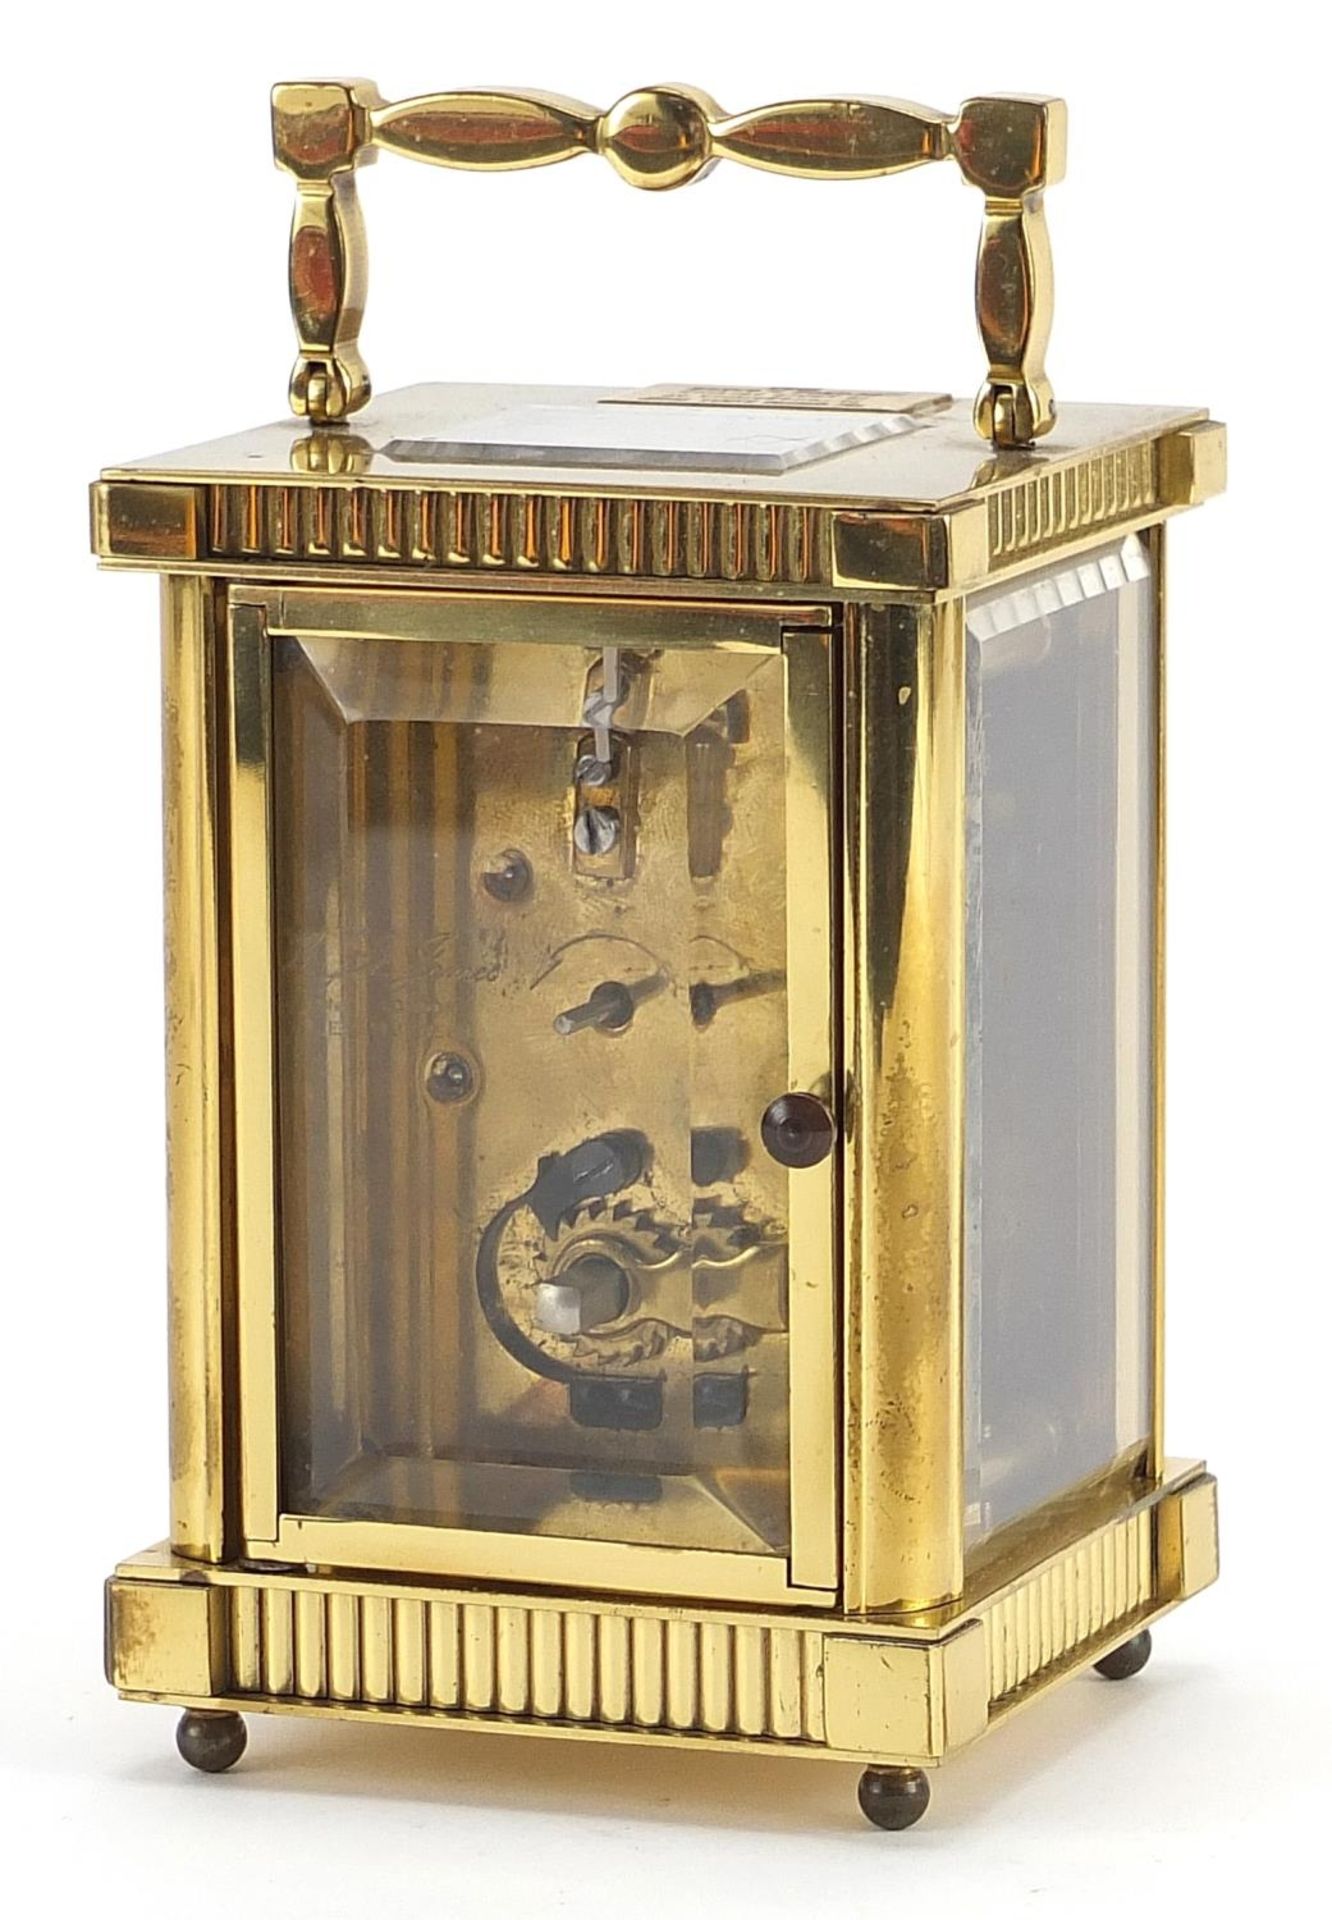 St James brass cased carriage clock with enamelled dial having Roman numerals, 11.5cm high - Image 2 of 6